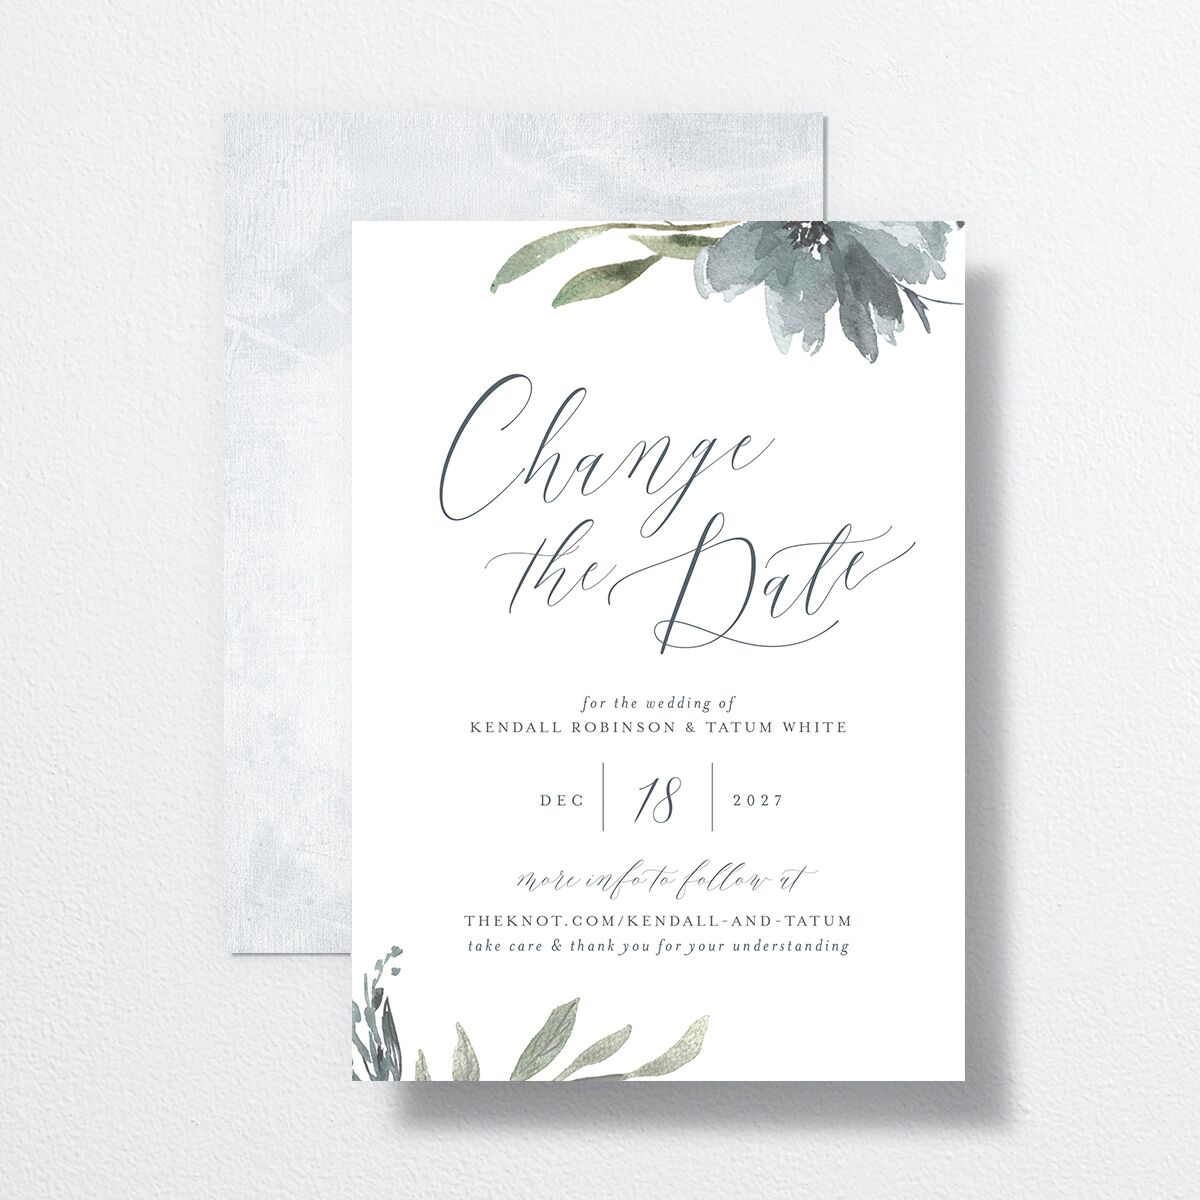 Muted Floral Change the Date Cards front-and-back in blue